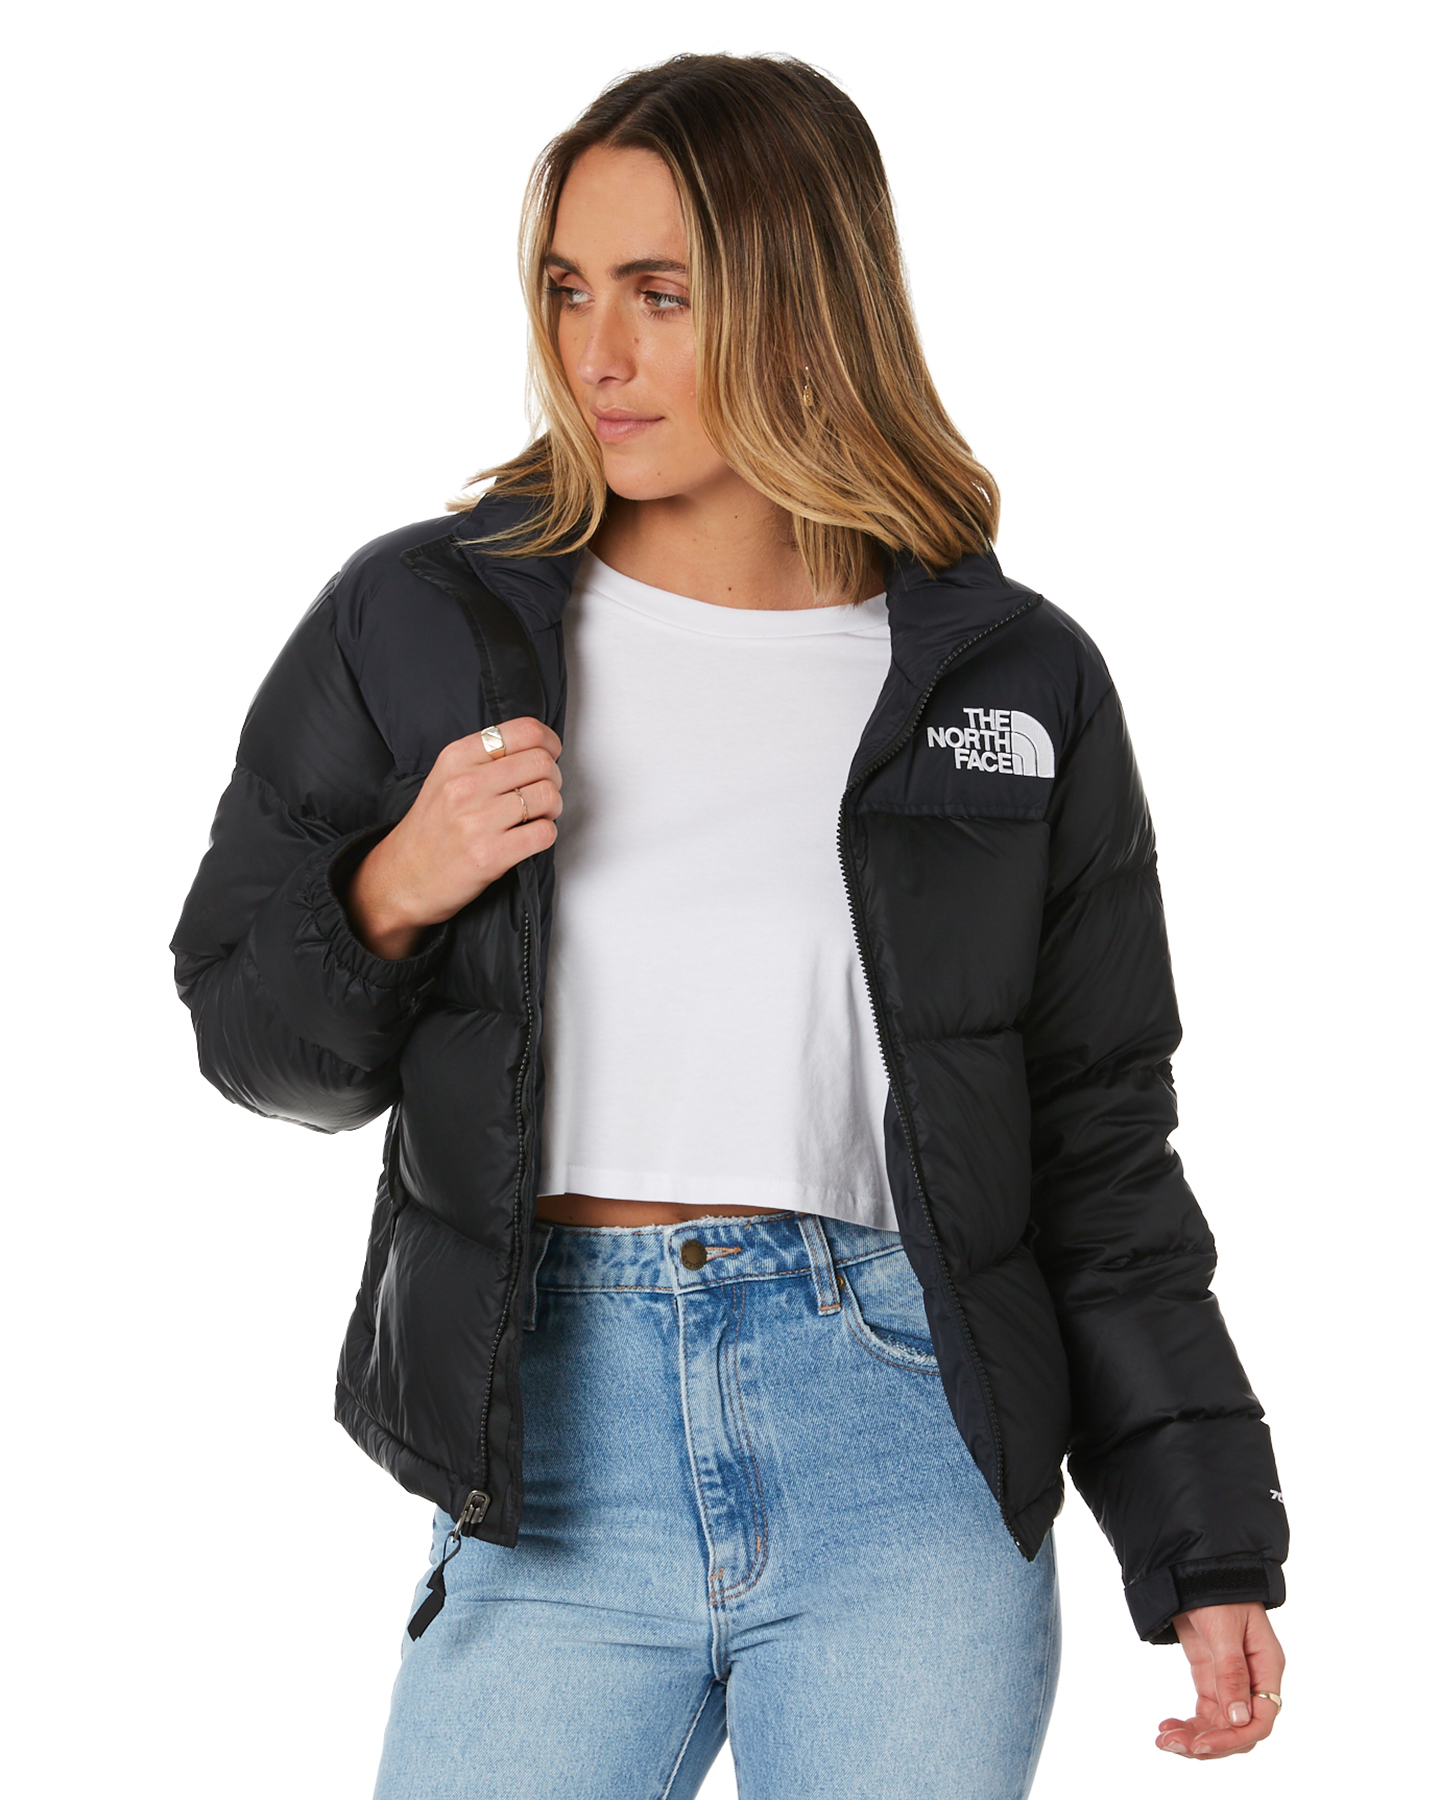 the north face jacket for women